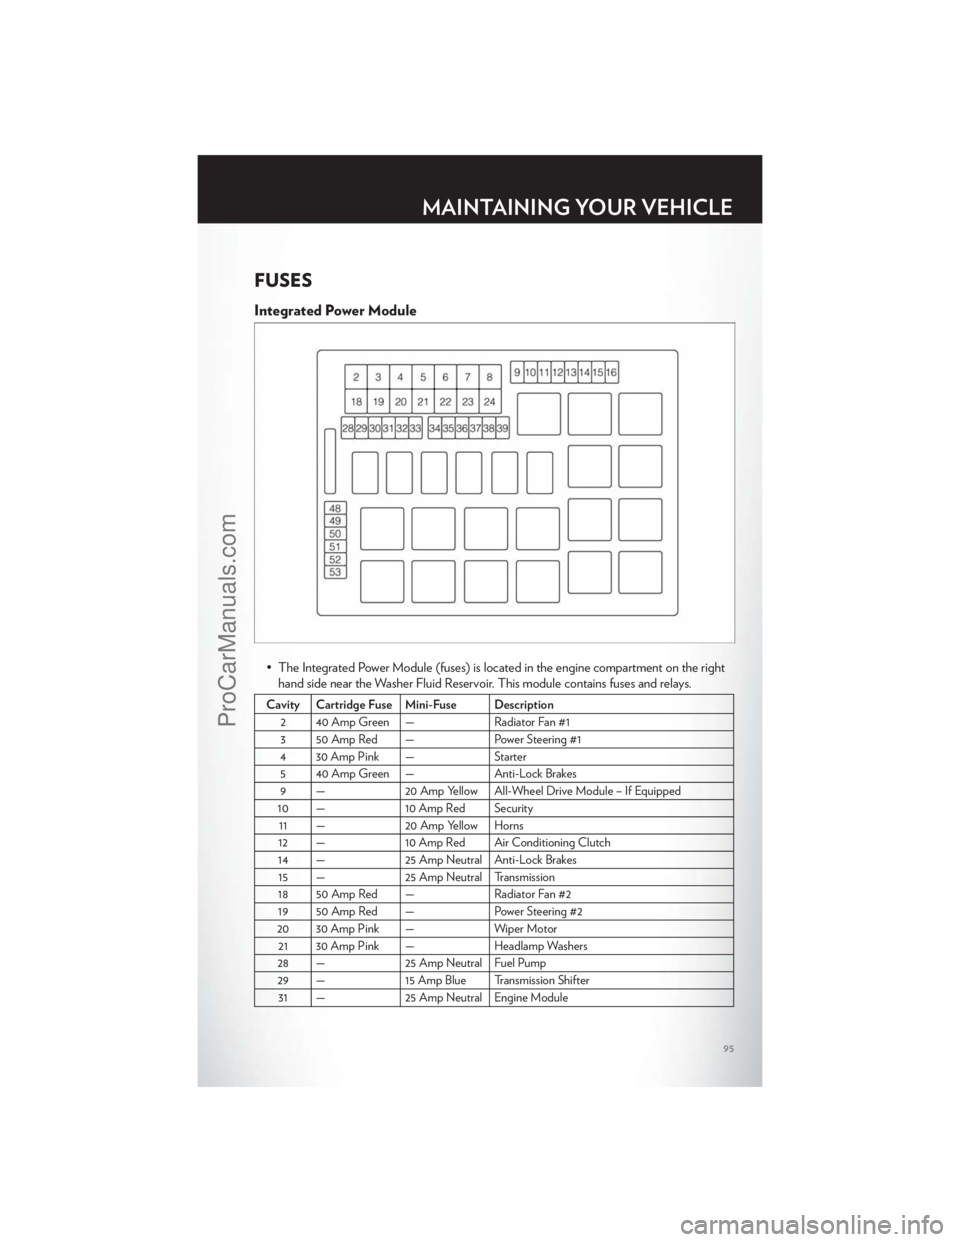 CHRYSLER 300 S 2012  Owners Manual FUSES
Integrated Power Module
• The Integrated Power Module (fuses) is located in the engine compartment on the righthand side near the Washer Fluid Reservoir. This module contains fuses and relays.